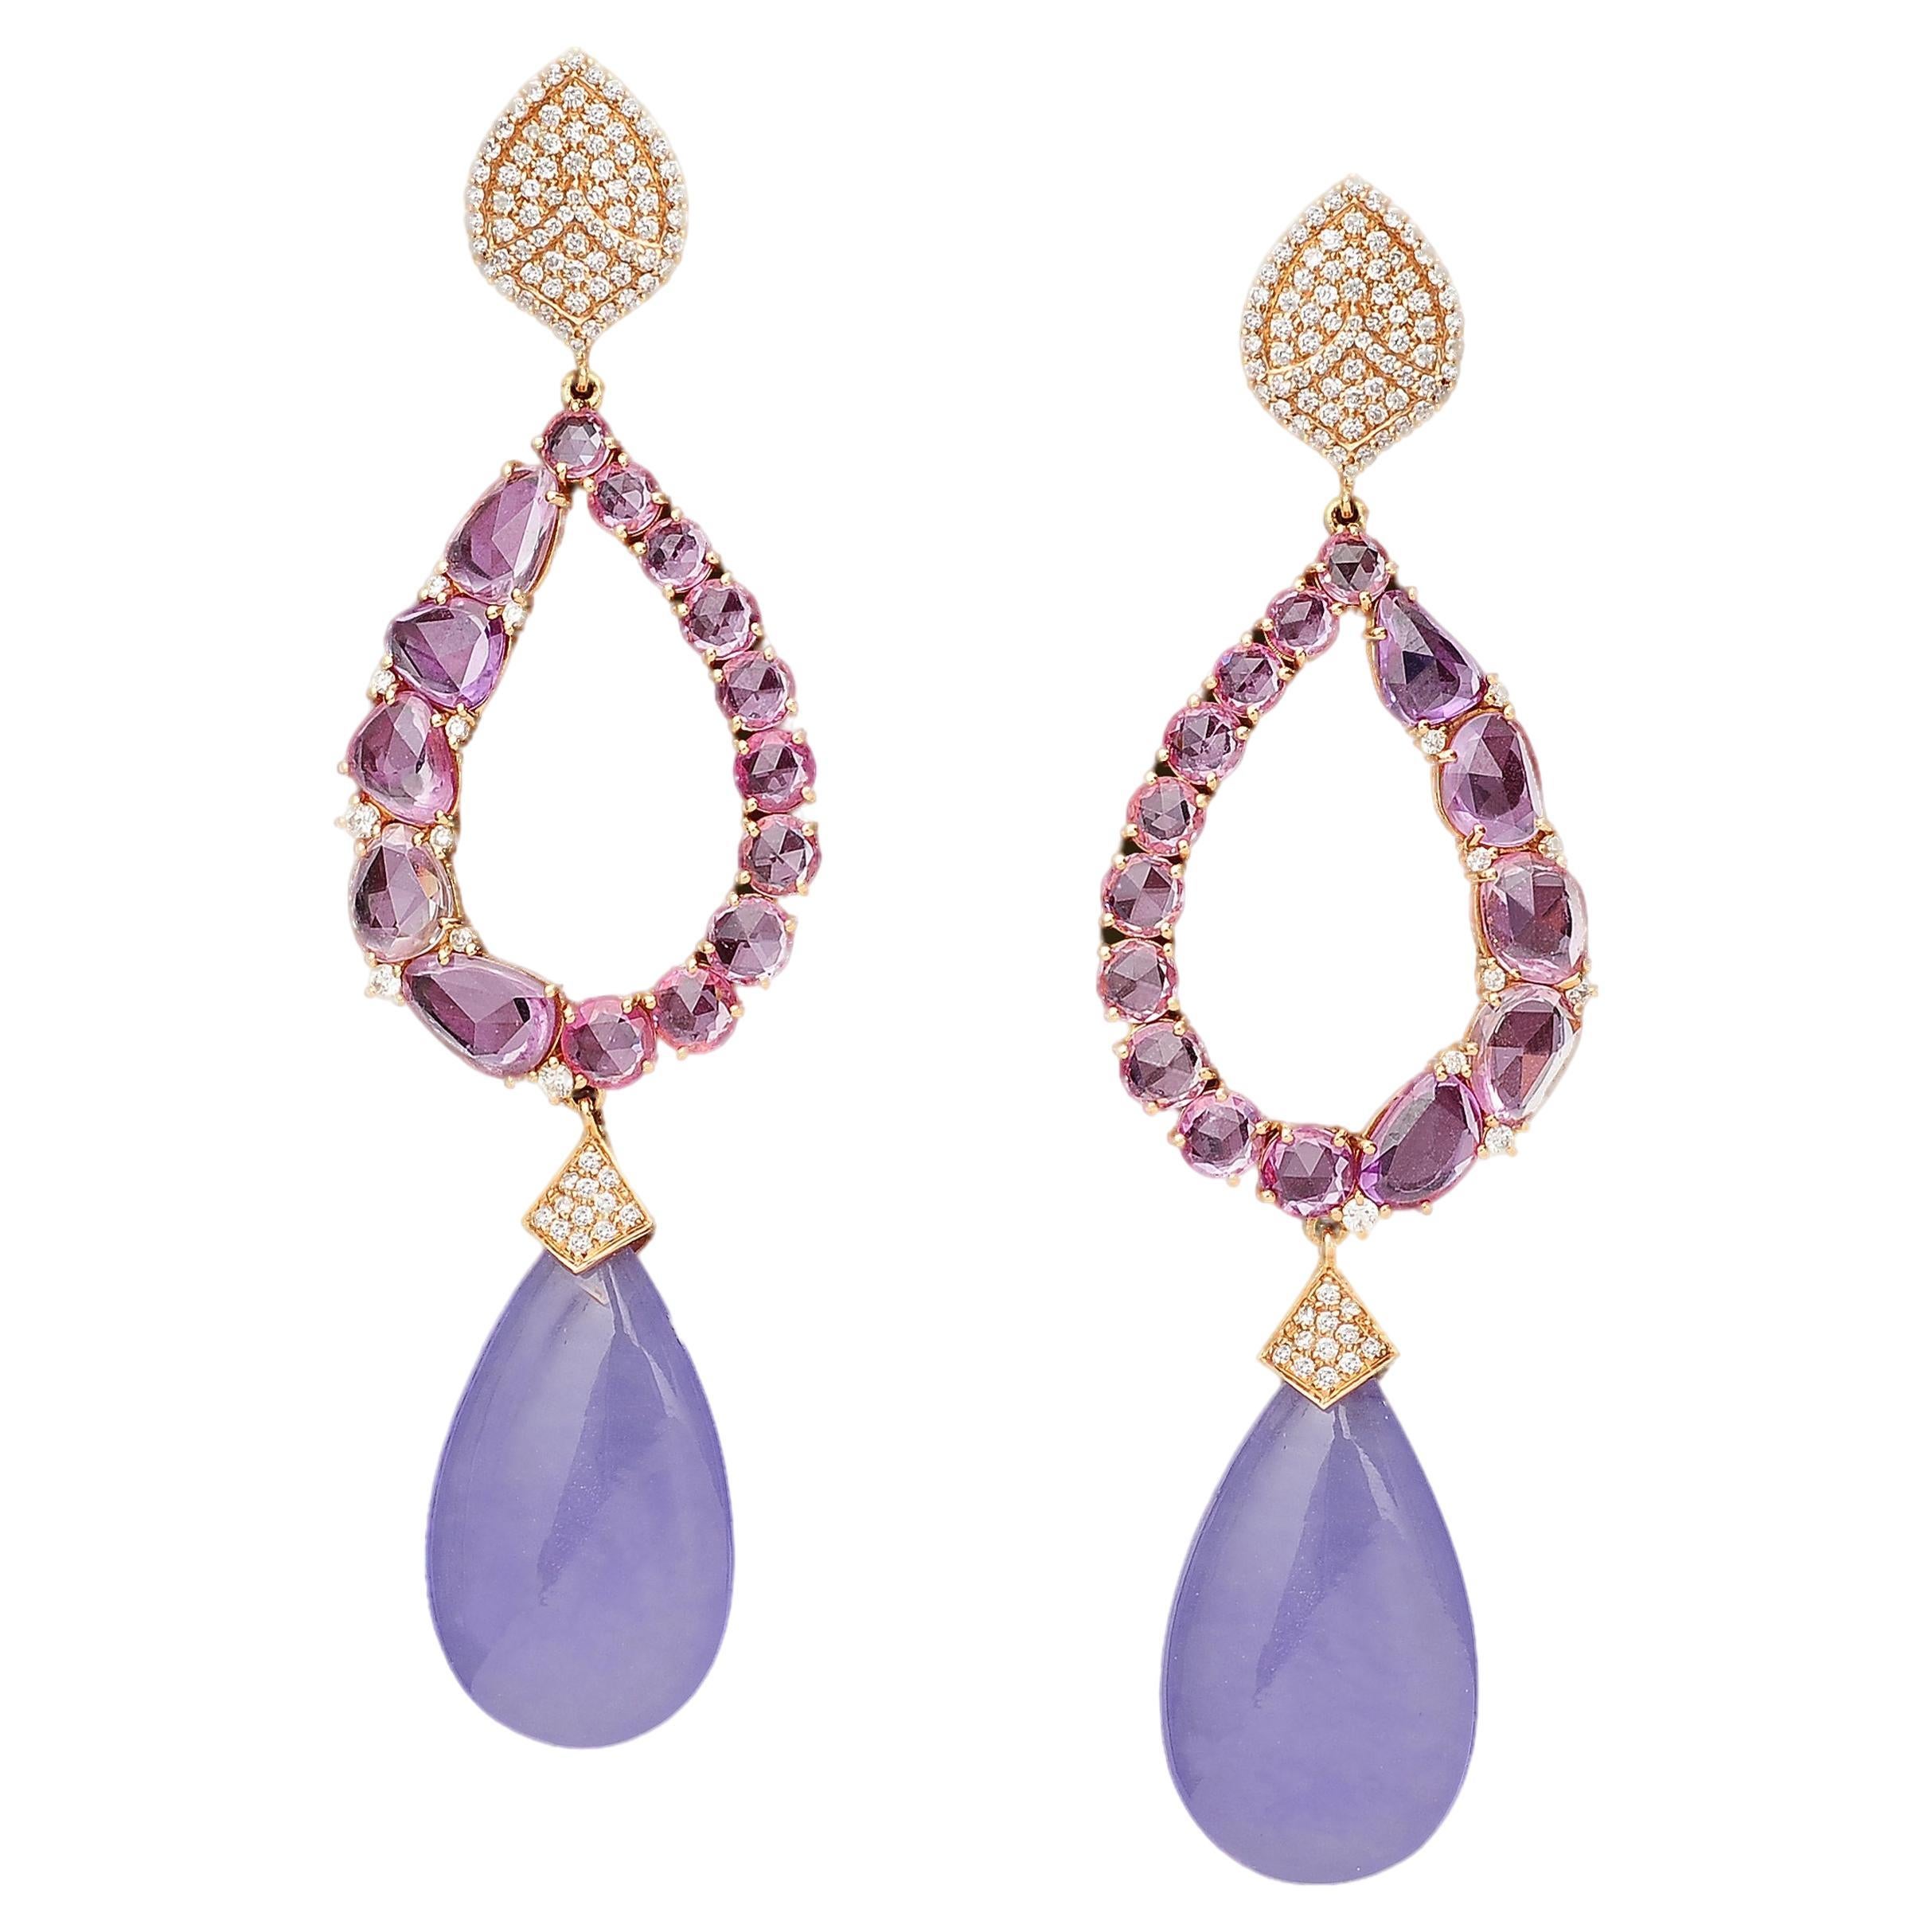 Earrings Arcobaleno in Lilac Jade, Pink Sapphires and Diamonds